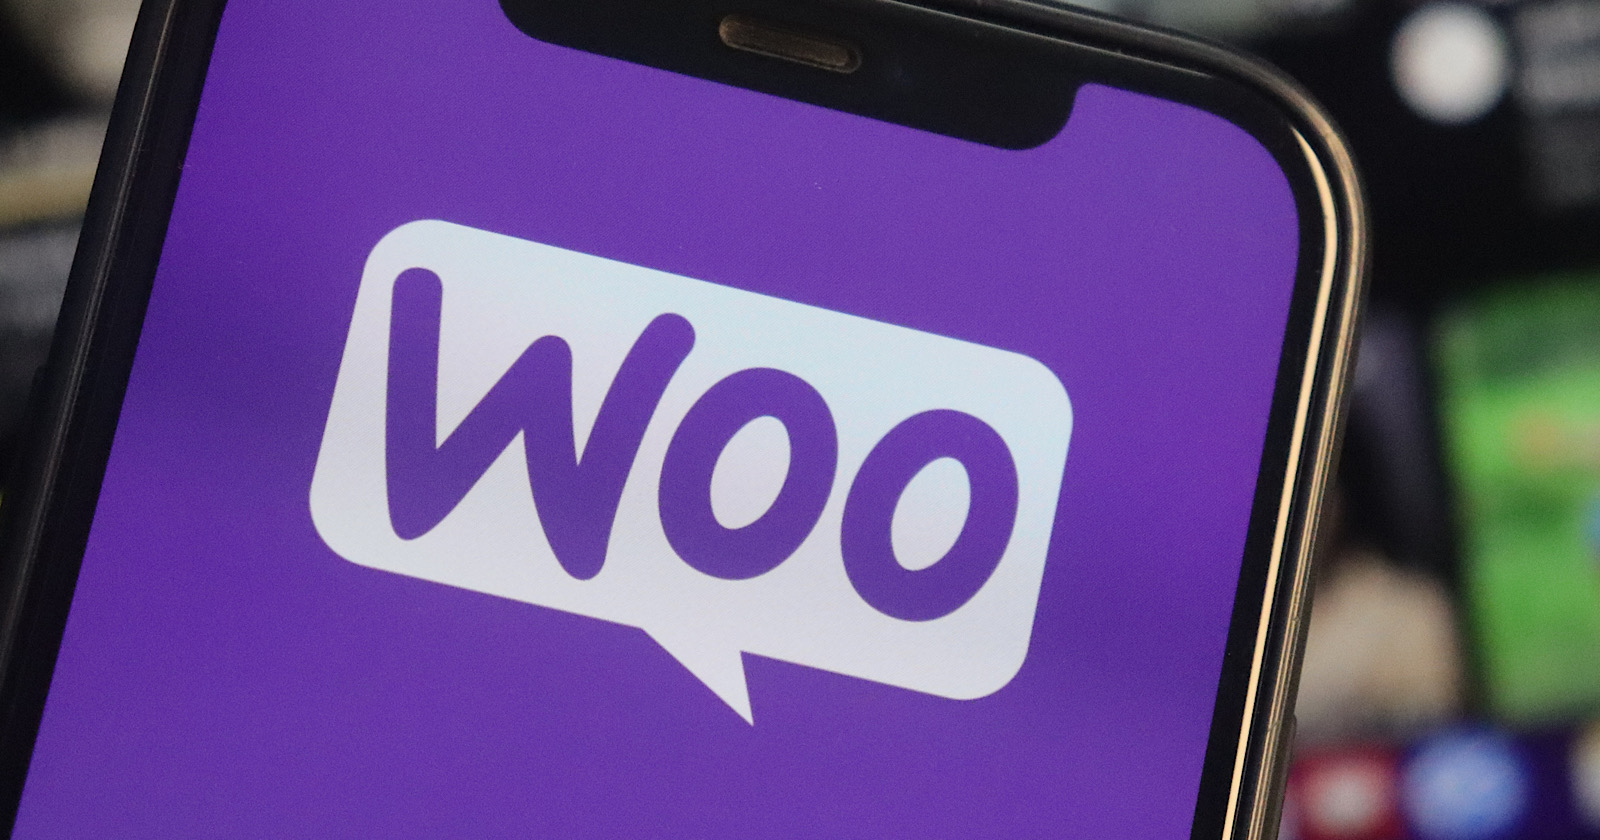 WooCommerce Targets 15% Web Share Immediately after Explosive Advancement